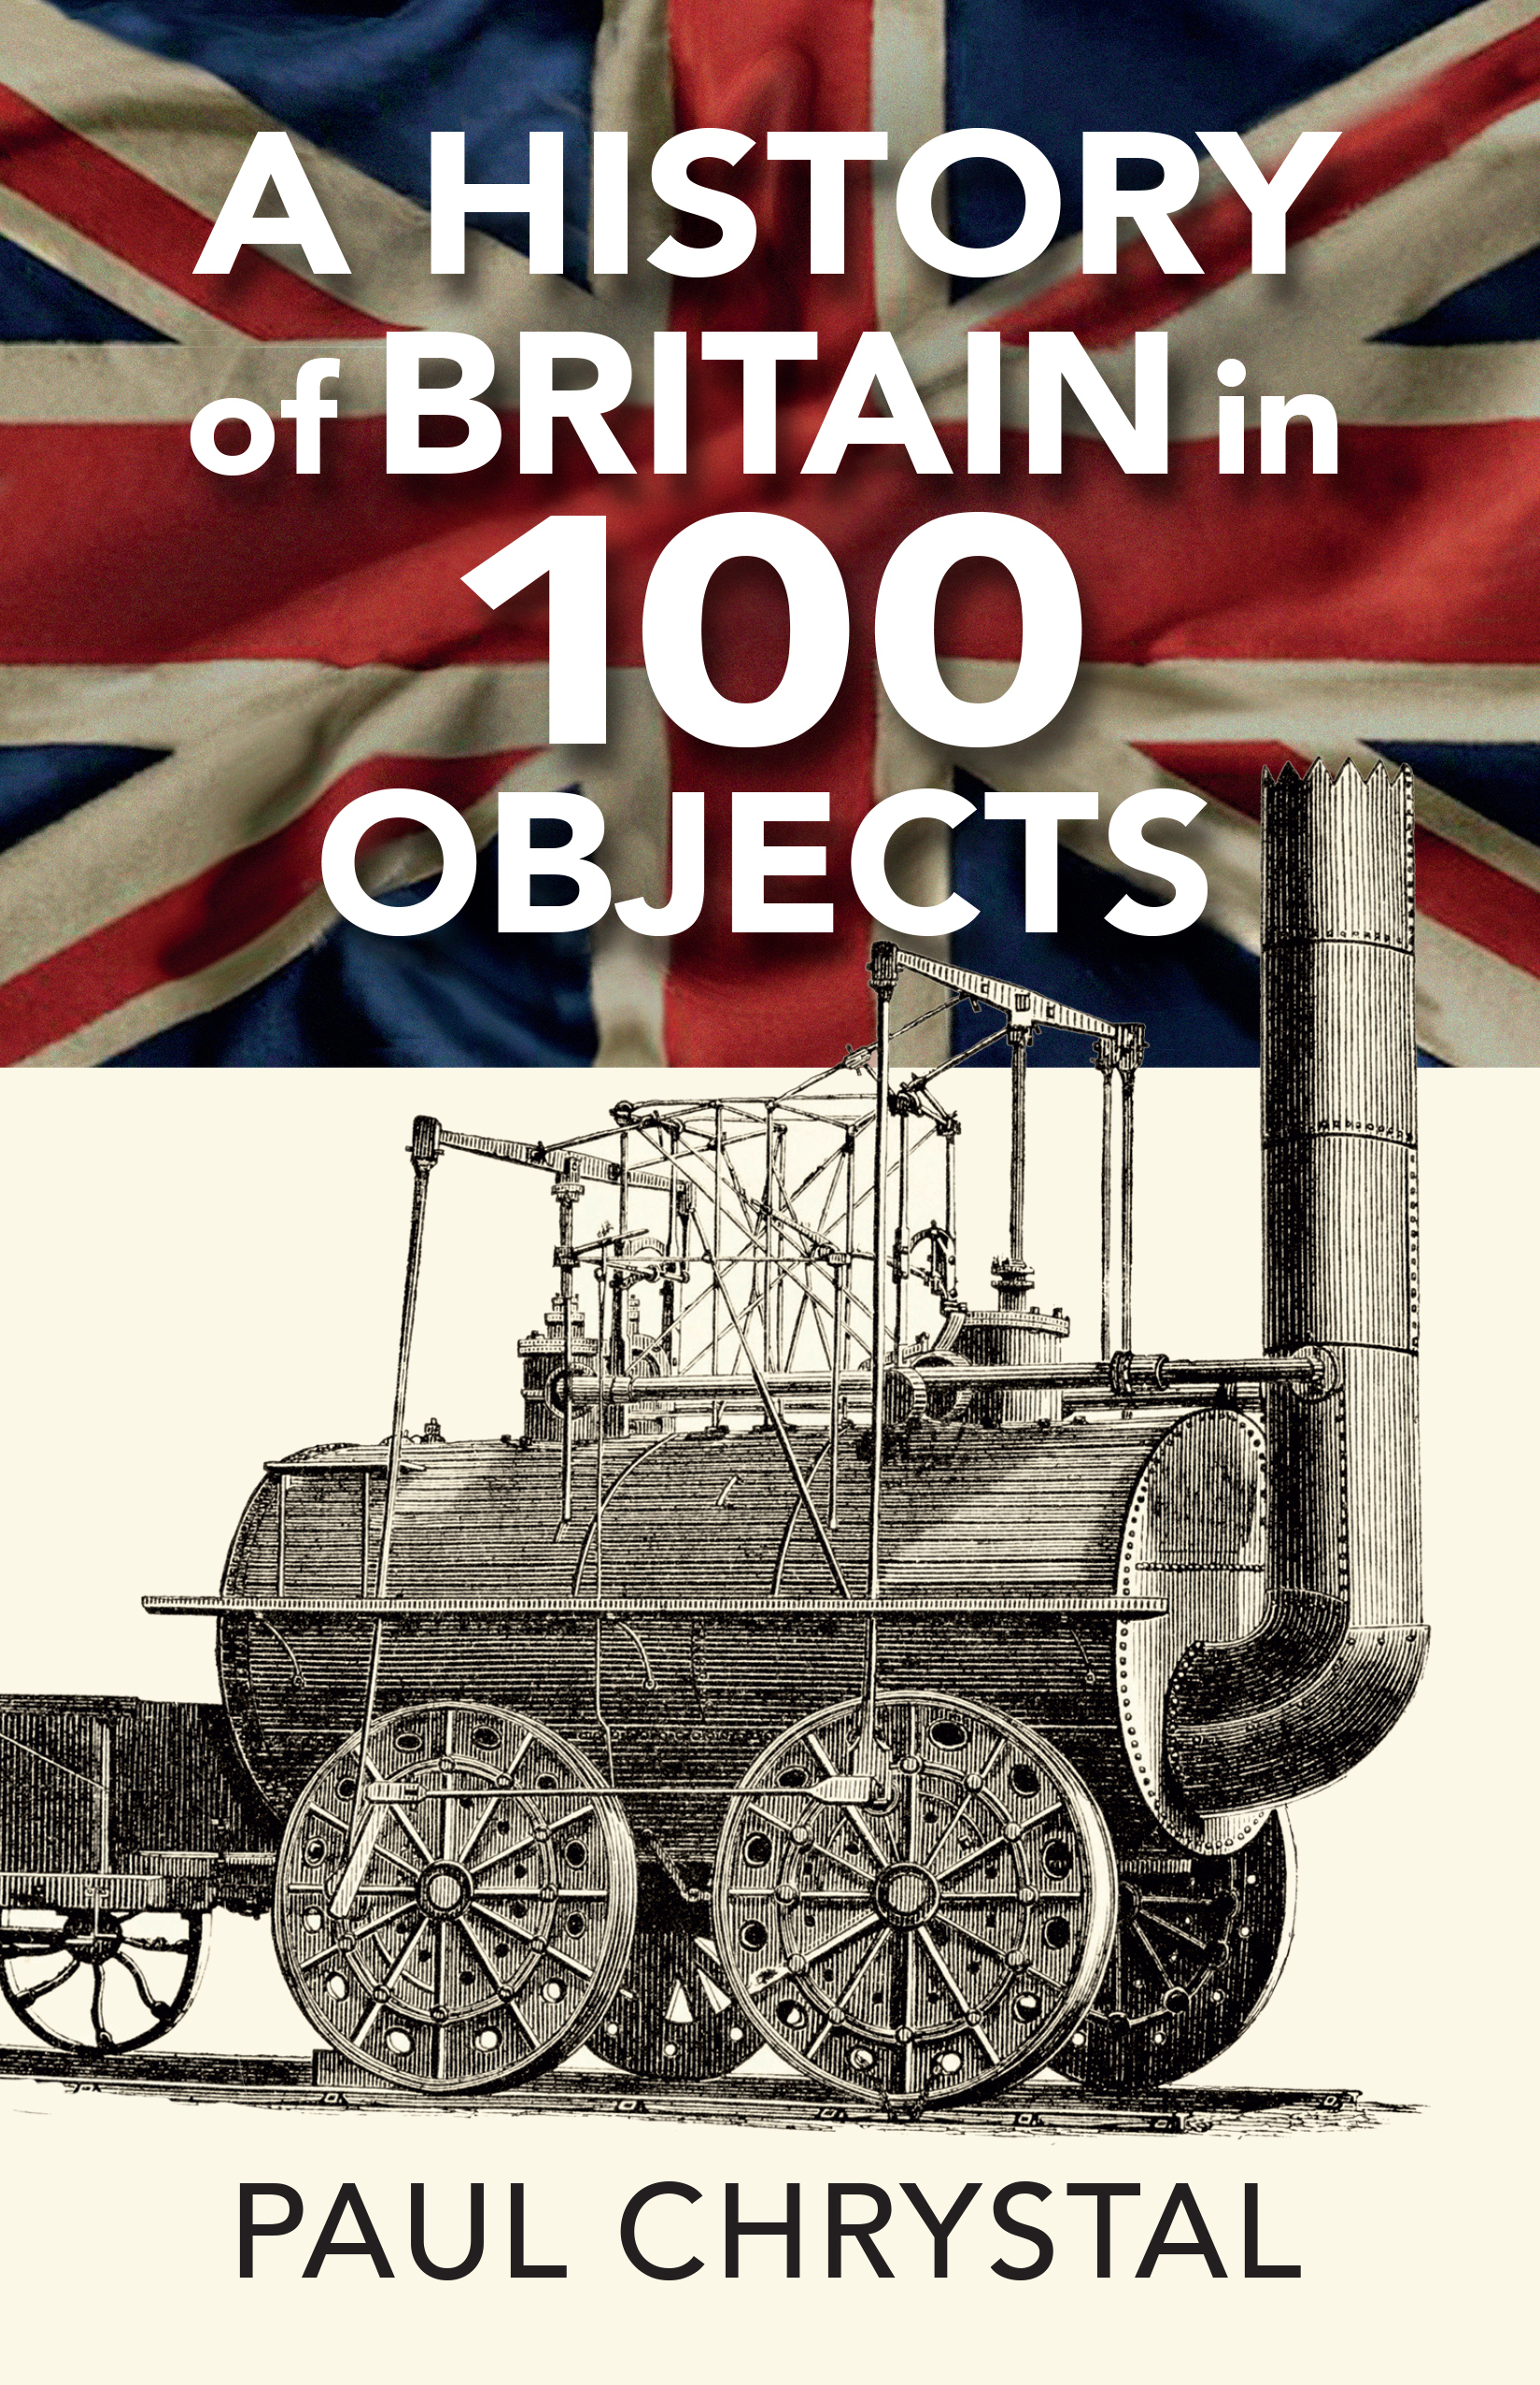 A History of Britain in 100 Objects by Paul Chrystal (DestinWorld Publishing, £14.99)